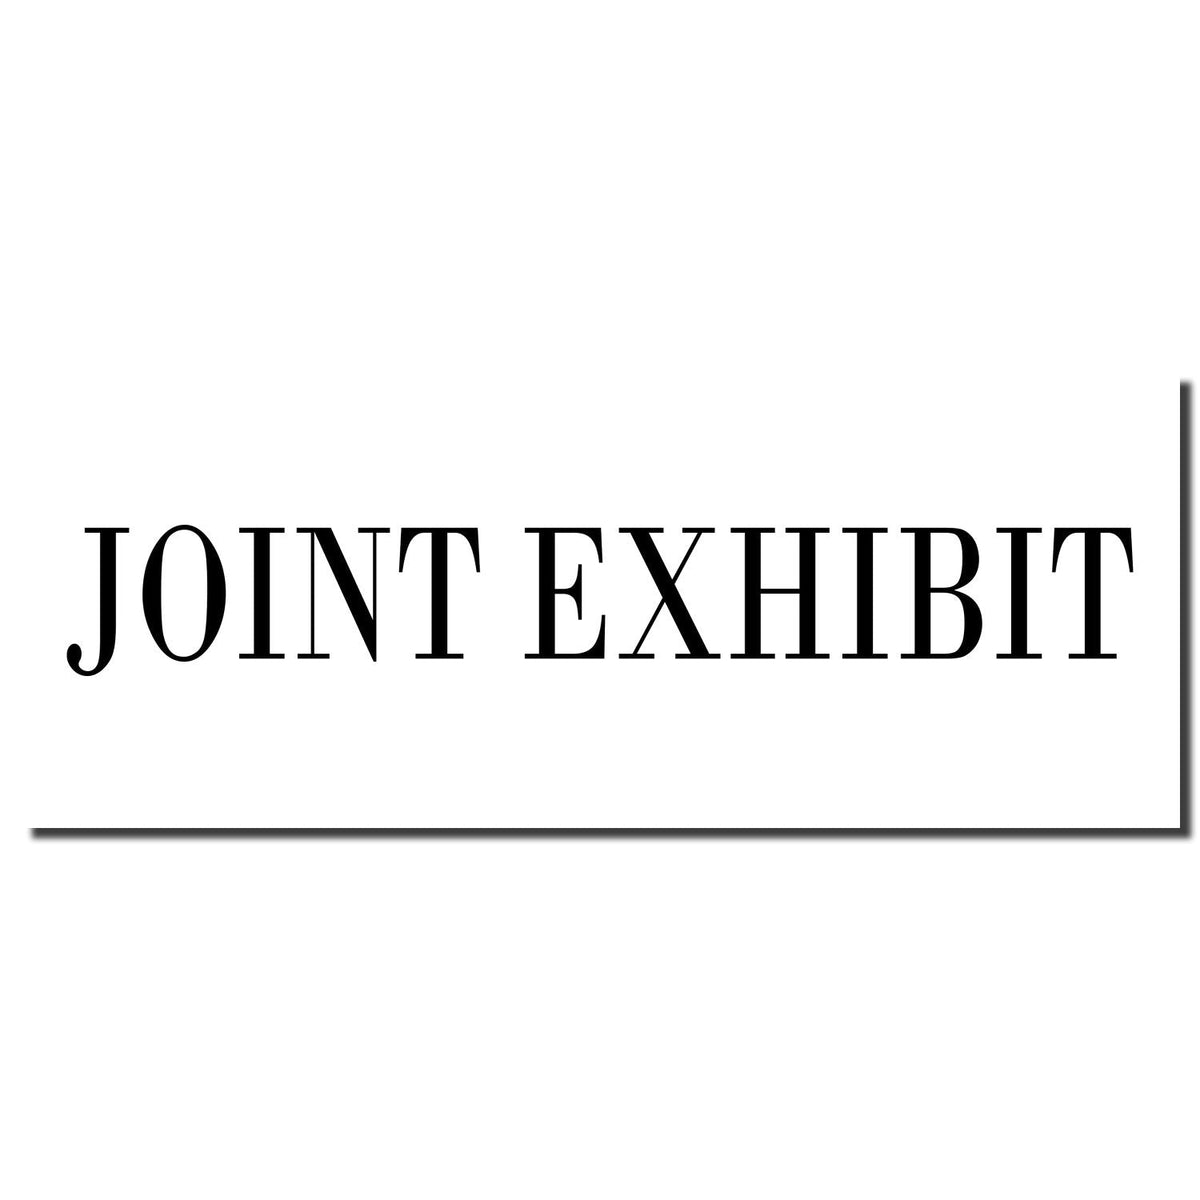 Enlarged Imprint Self Inking Joint Exhibit Stamp Sample